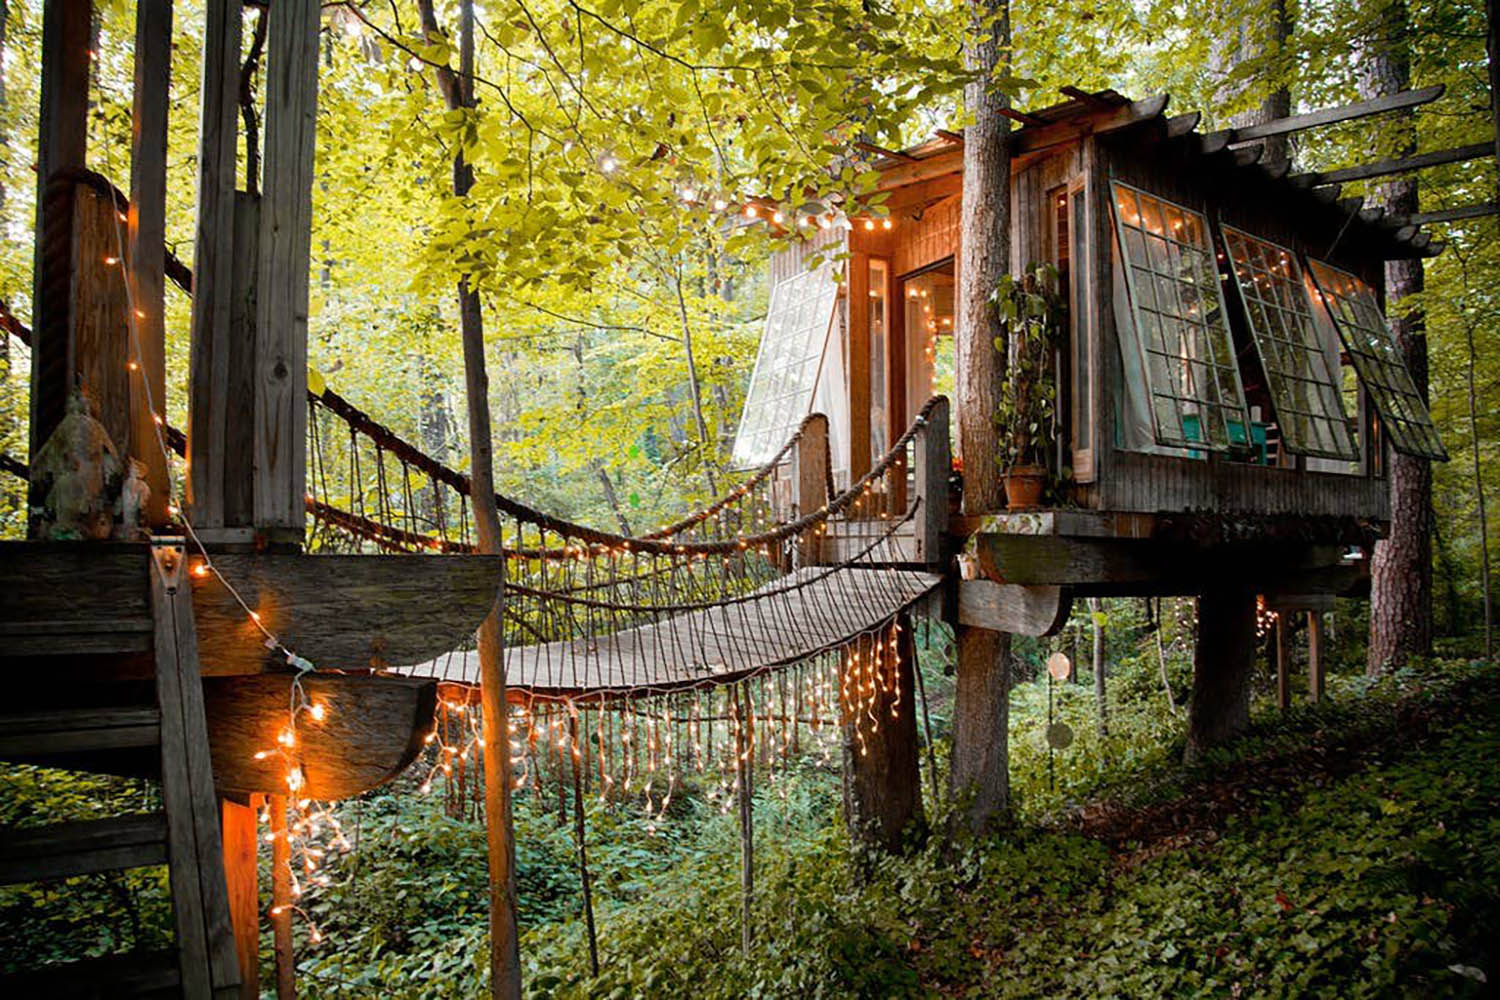 The Coolest Treehouses To Stay In Around The World The Blonde Abroad,Rooms To Go Discontinued Bedroom Sets